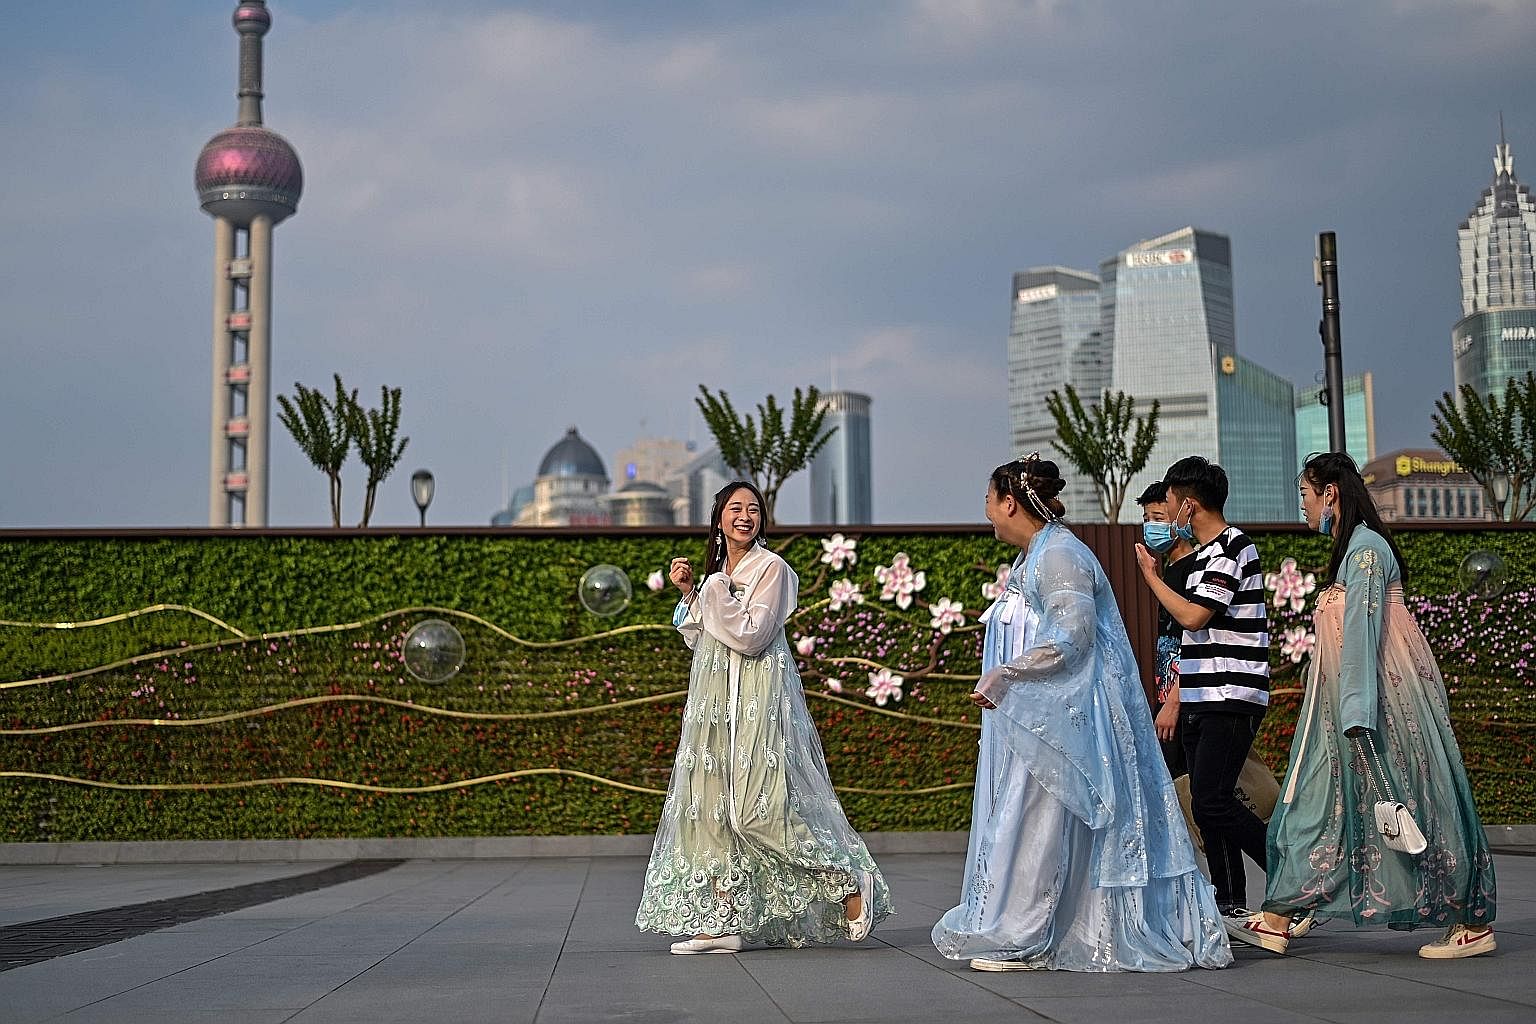 Young women in traditional dress at The Bund in Shanghai last Tuesday. China, being the first to face Covid-19, is now leading the world in getting a measure of control over it. Other markets in Asia and Europe are reopening in phases, and economic i